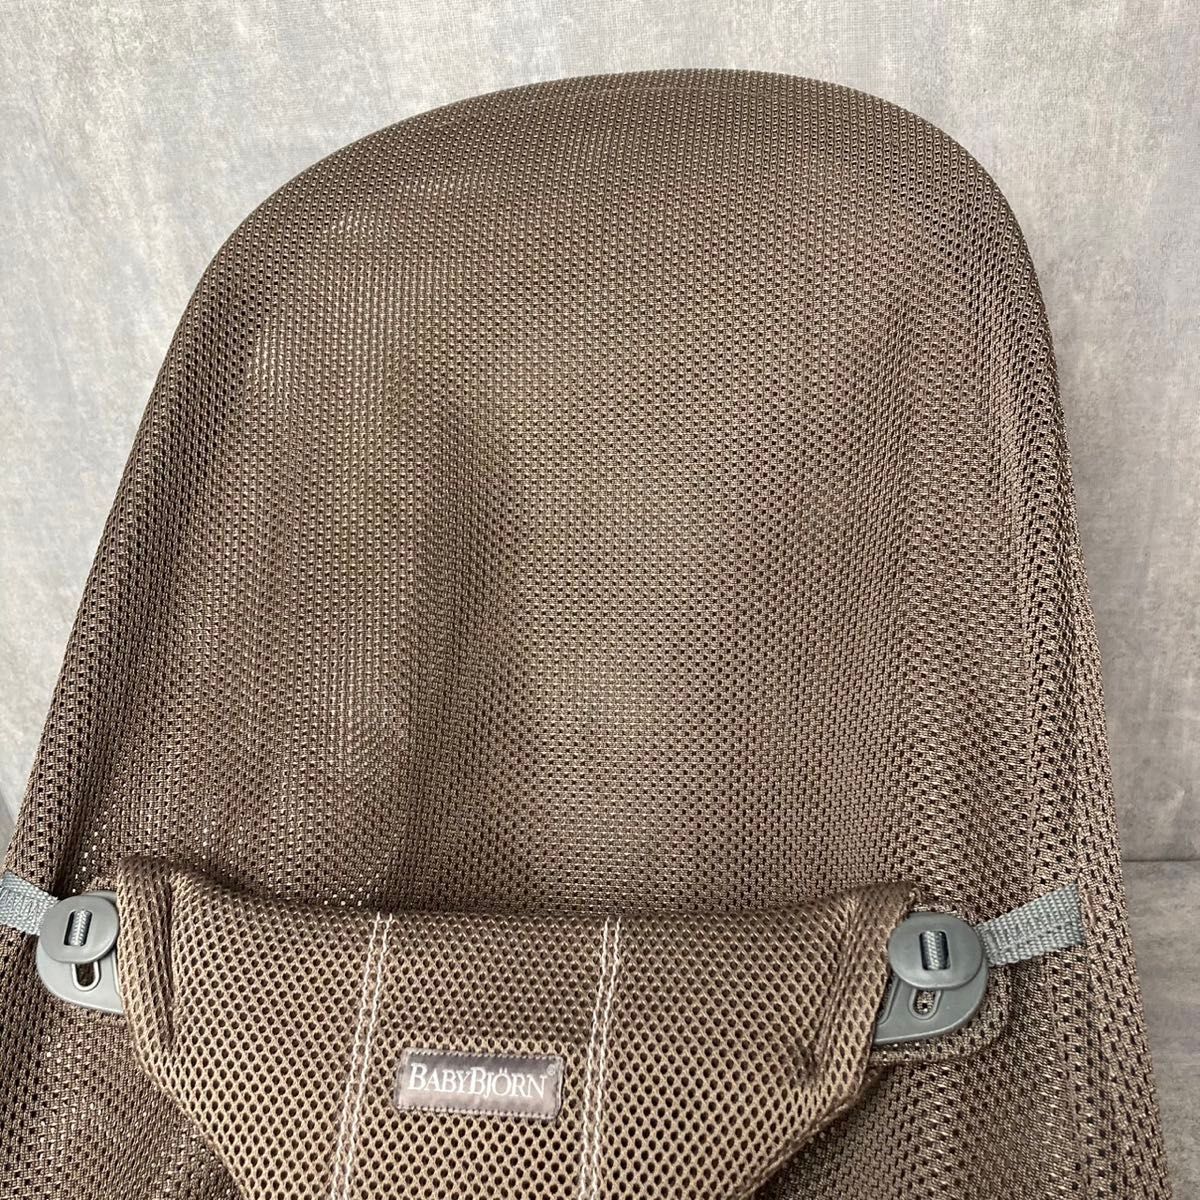  baby byorun bouncer Bliss air cocoa mesh have been cleaned 